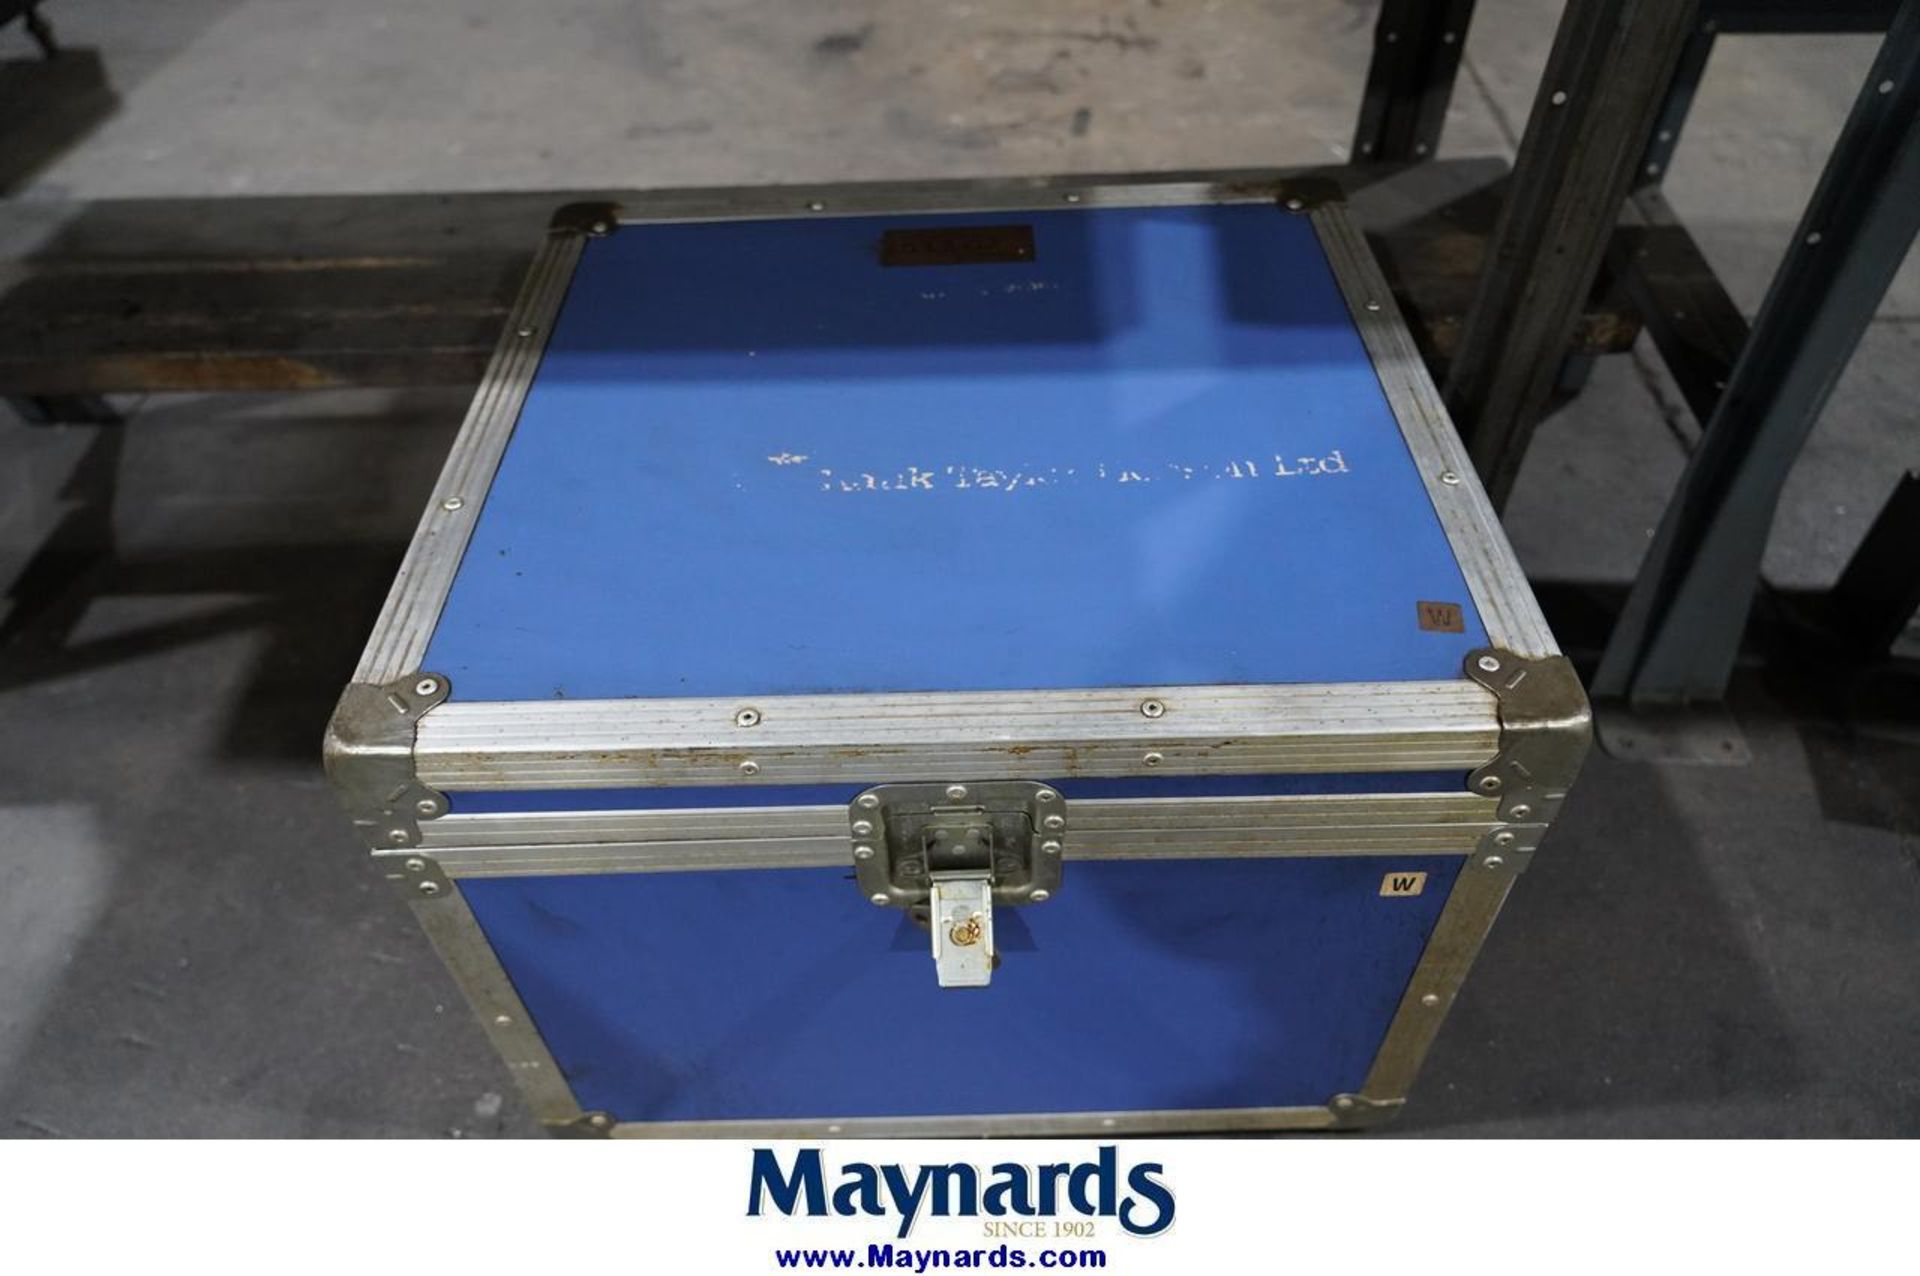 Taylor Hobson Talyrond 30 Roundness Measument Machine - Image 7 of 10